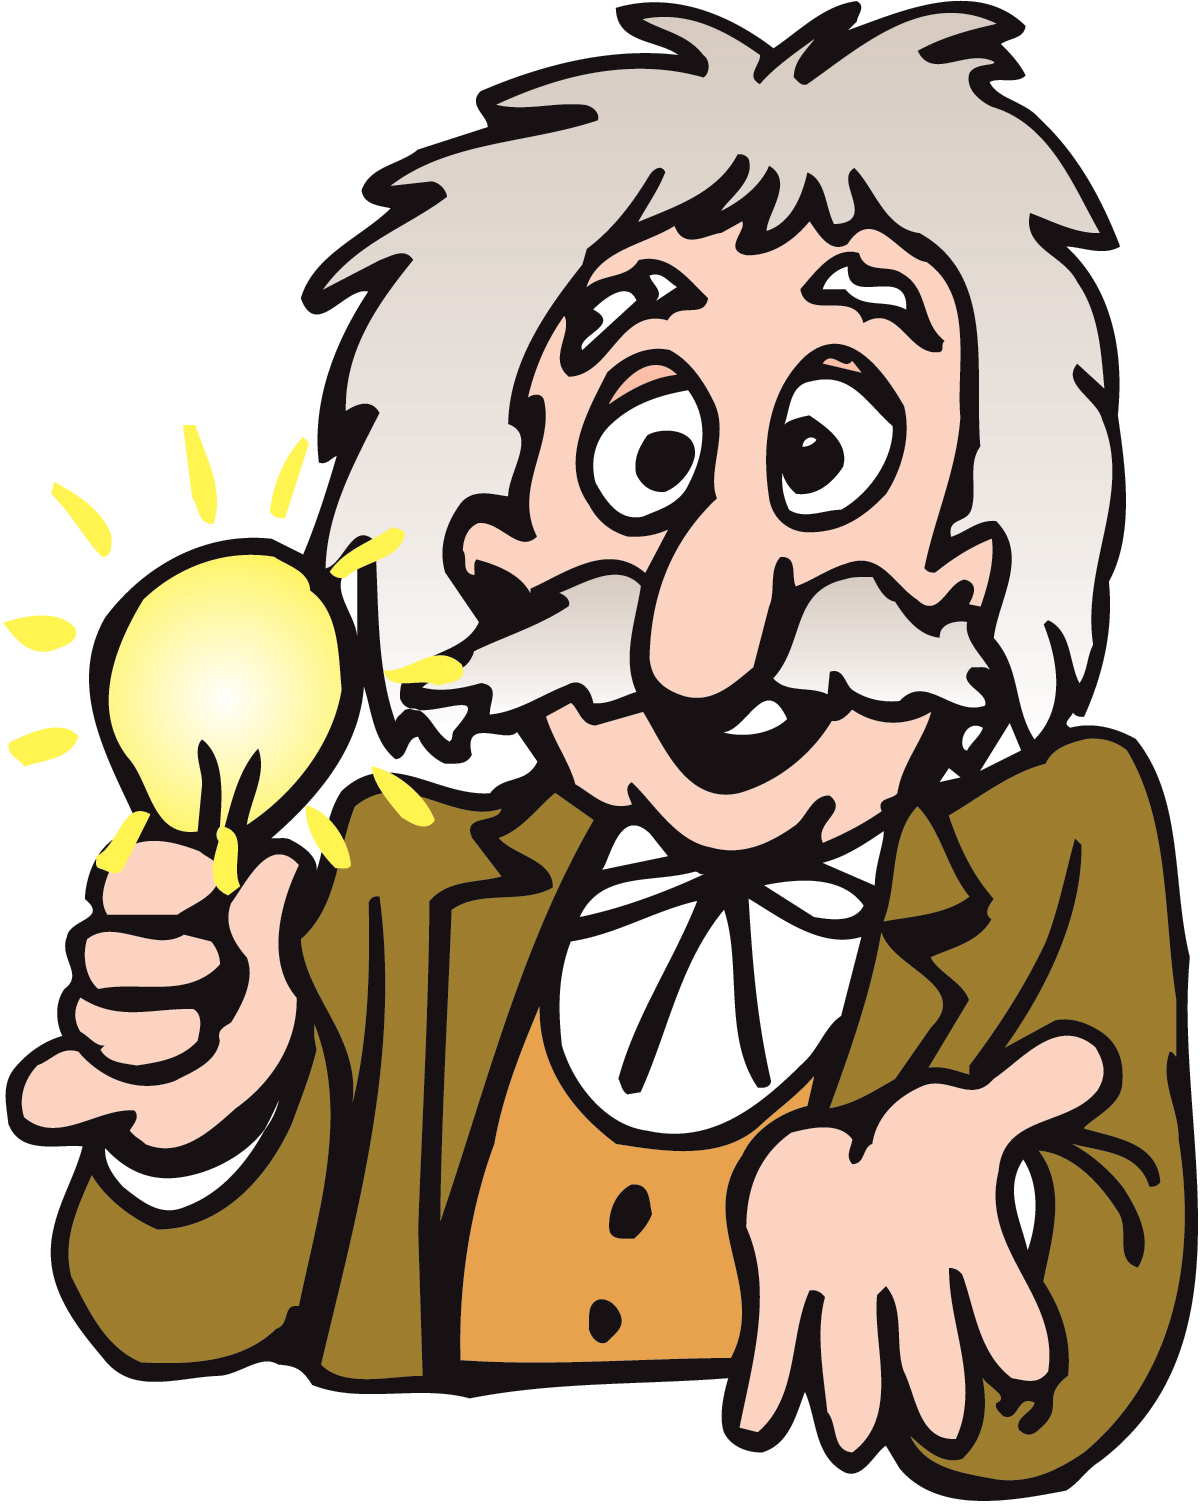 Thomas Edison Inventions - ClipArt Best